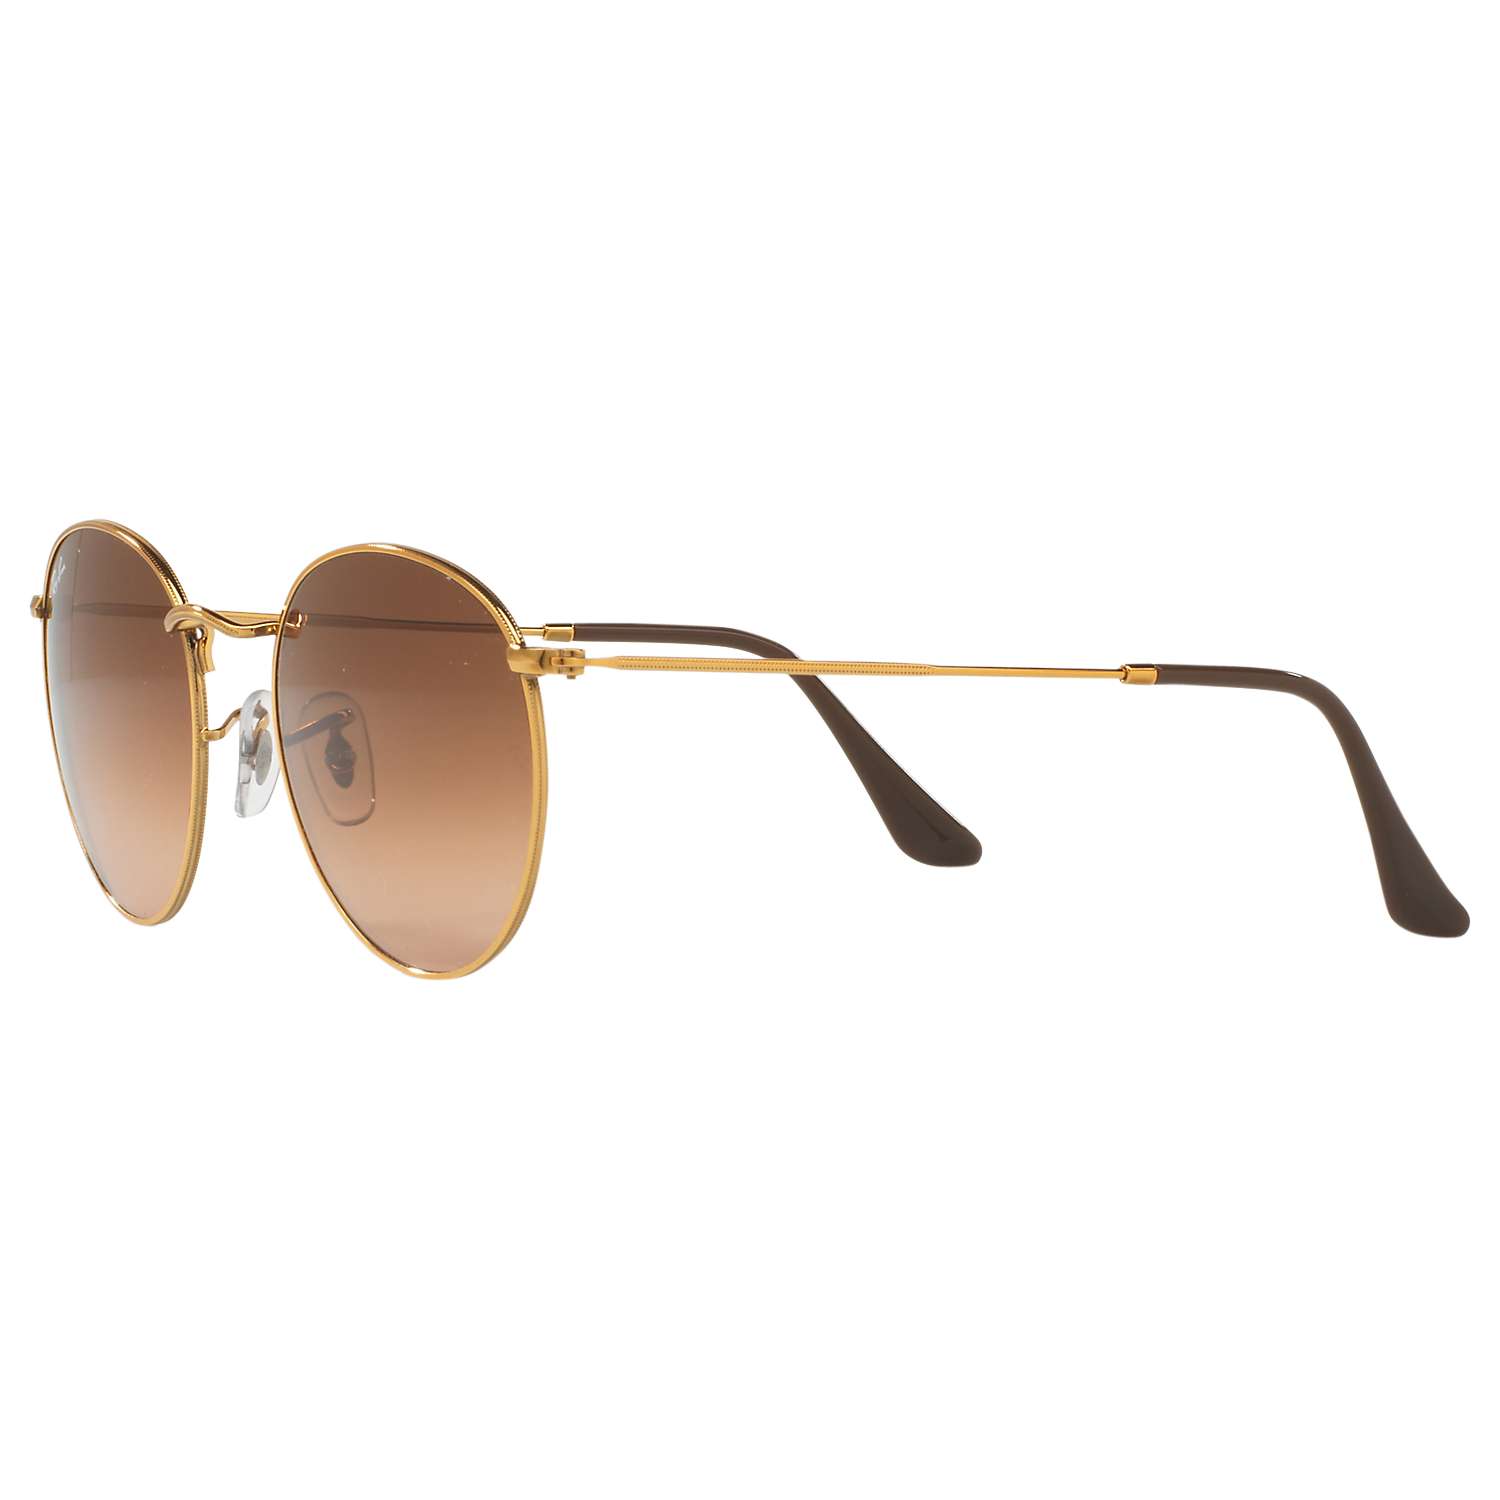 Buy Ray-Ban RB3447 Round Sunglasses Online at johnlewis.com